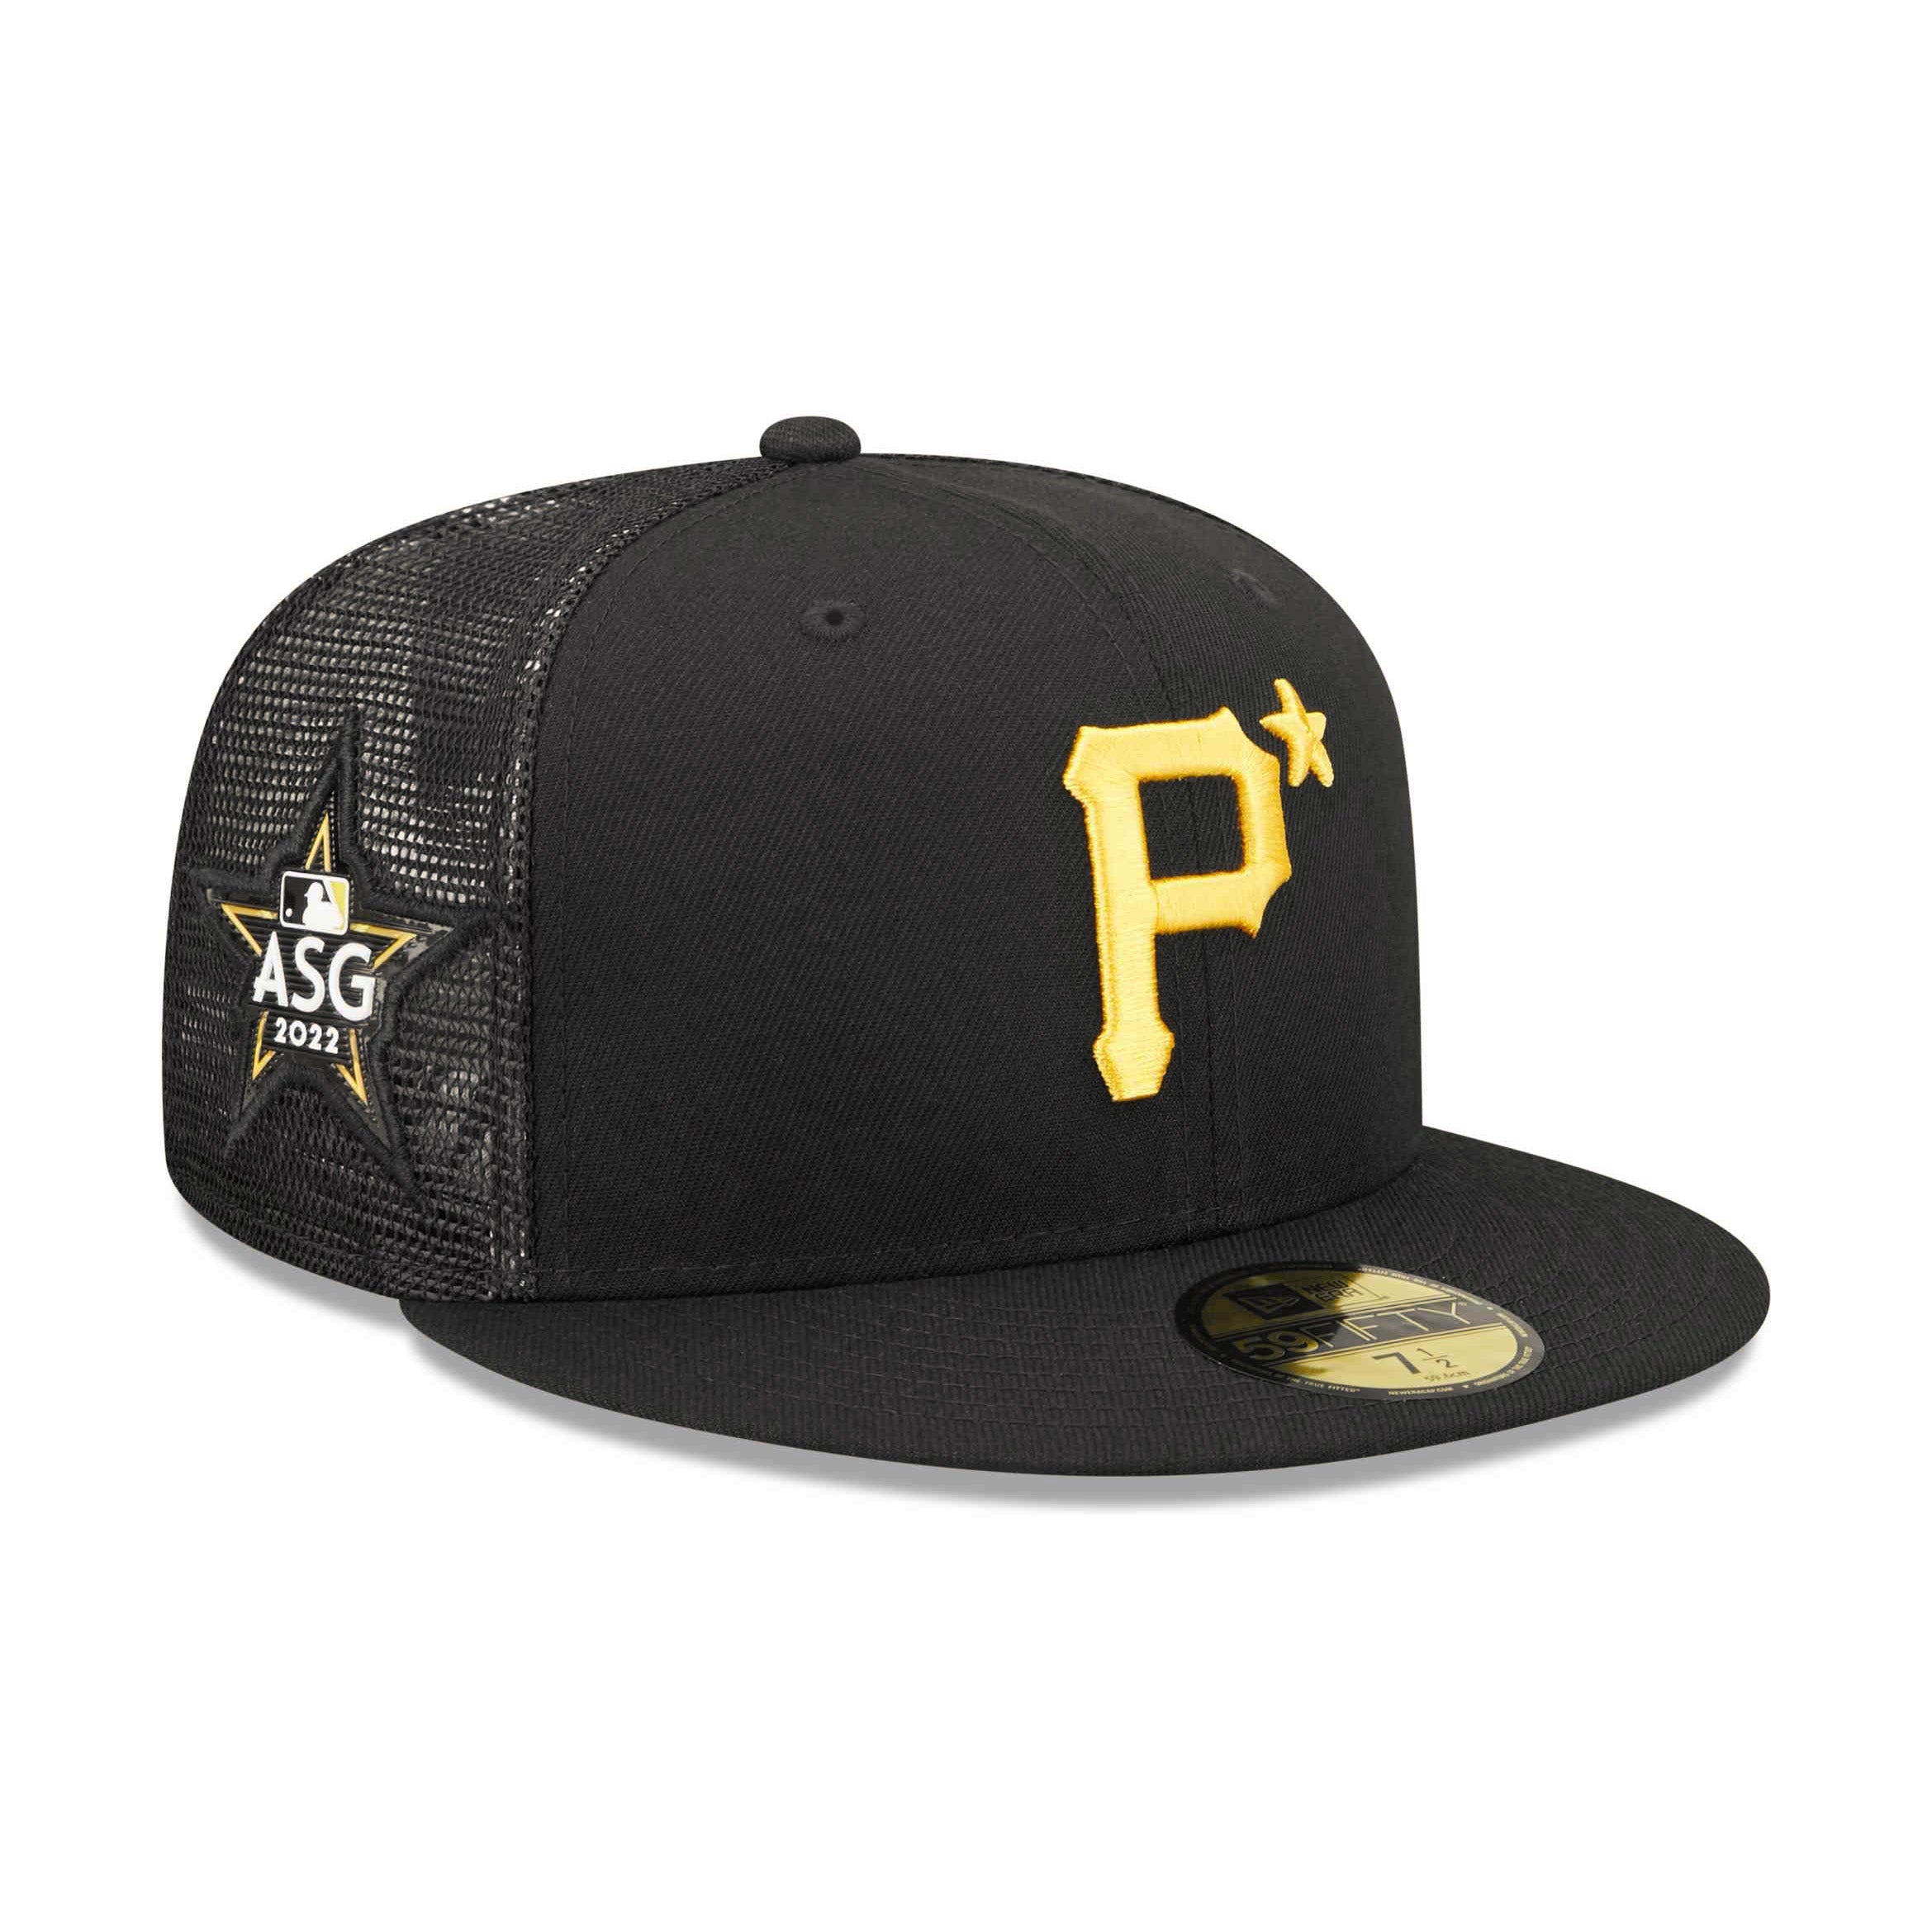 NEW ERA 59FIFTY MLB PITTSBURGH PIRATES ALL STAR GAME 2022 BLACK / TROPIC GREY UV FITTED TRUCKER CAP